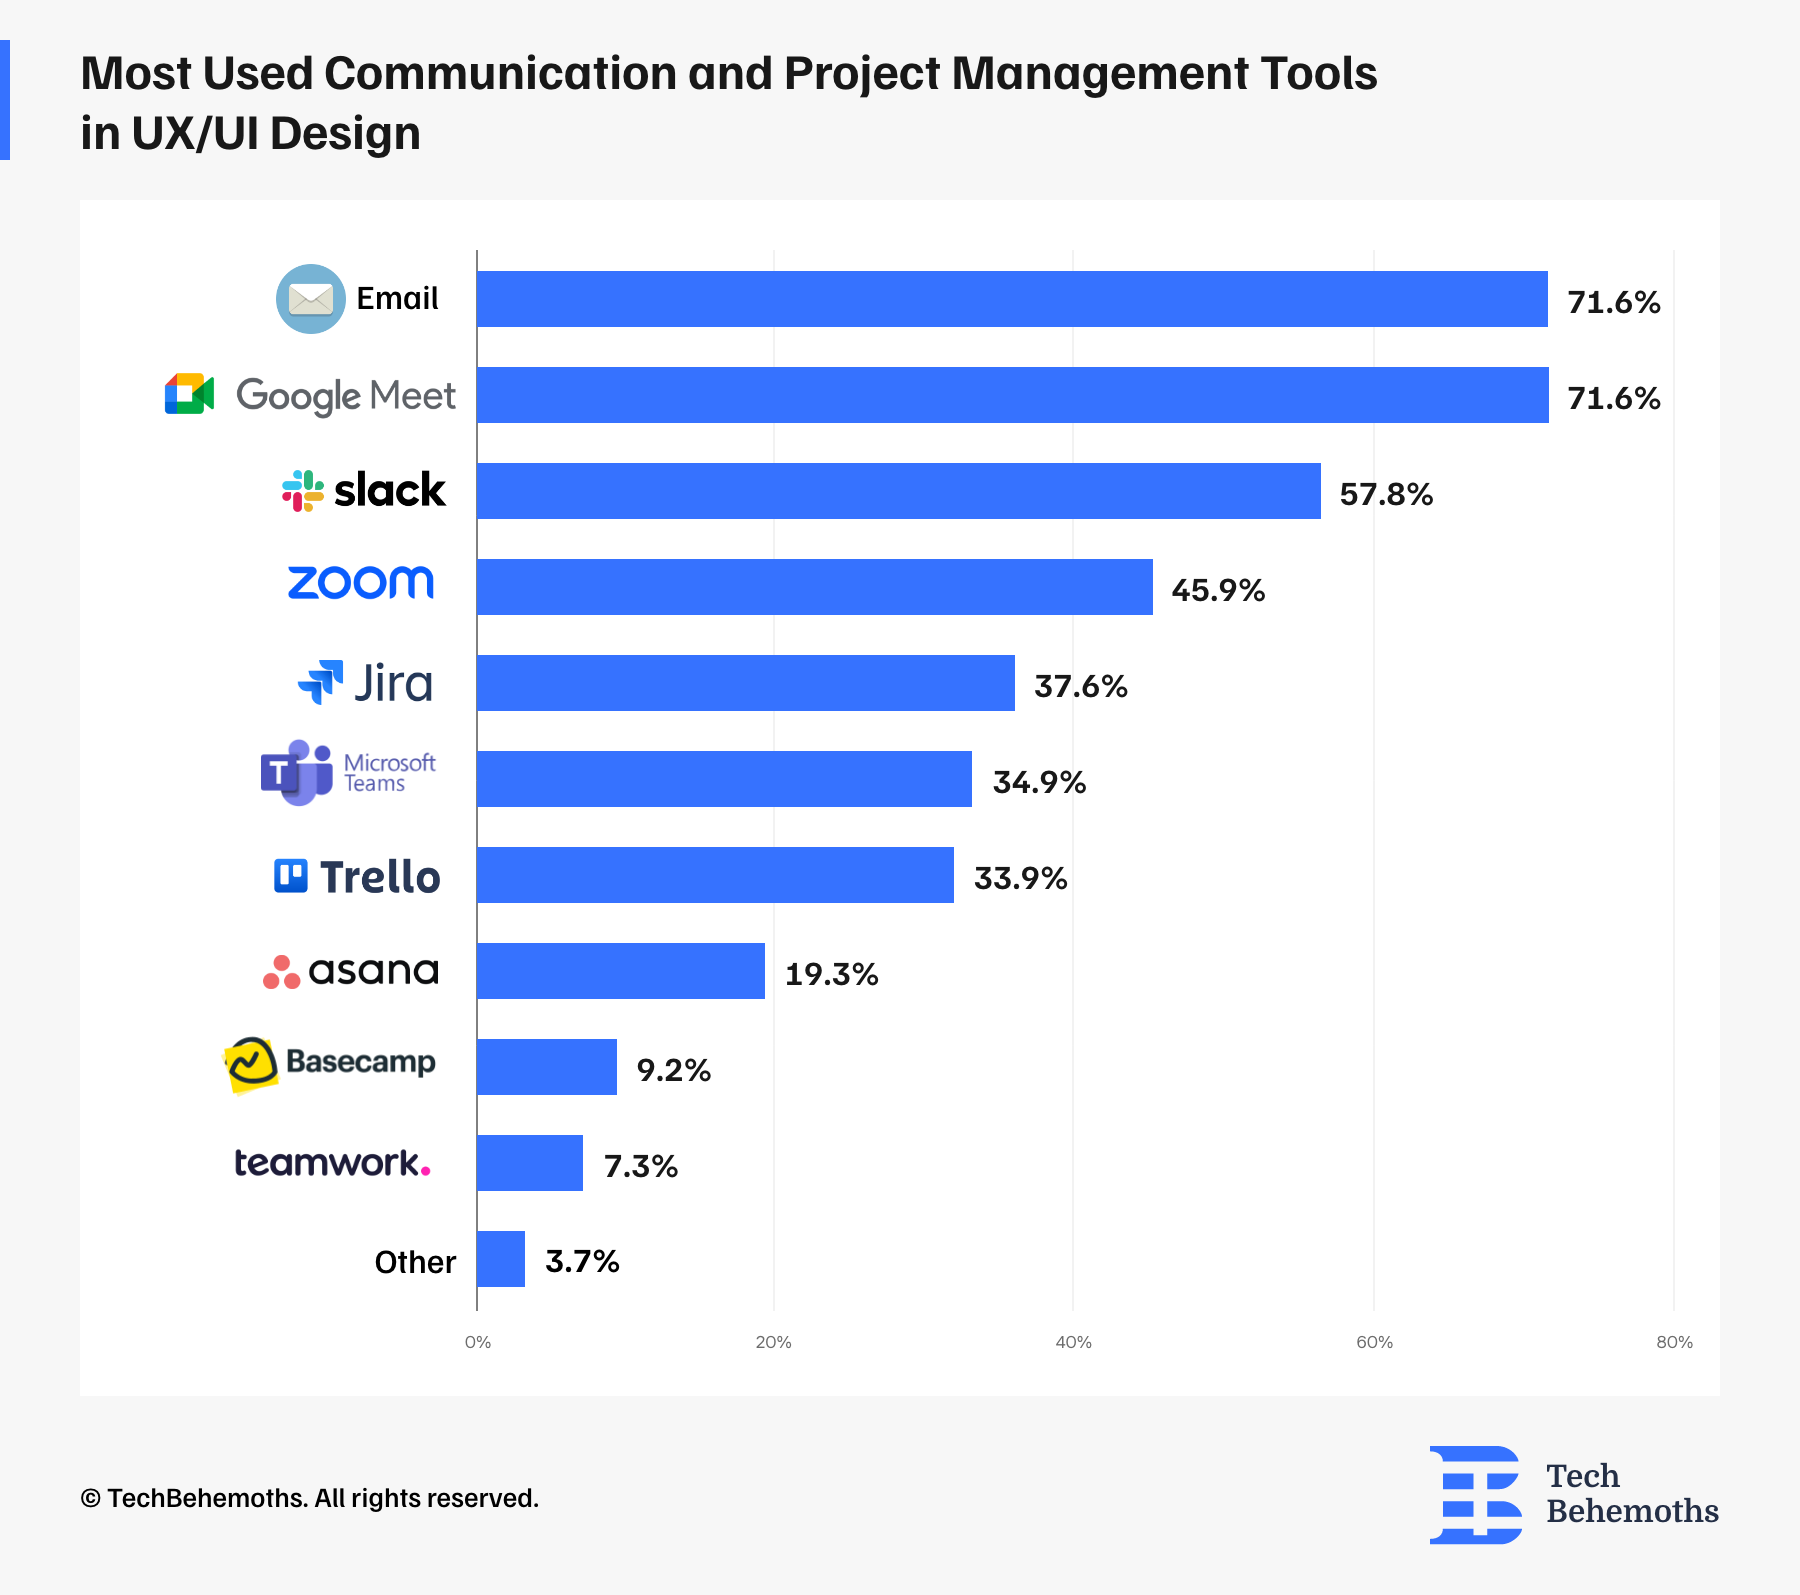 Most Used Communication and Project Management Tools in UX/UI Design